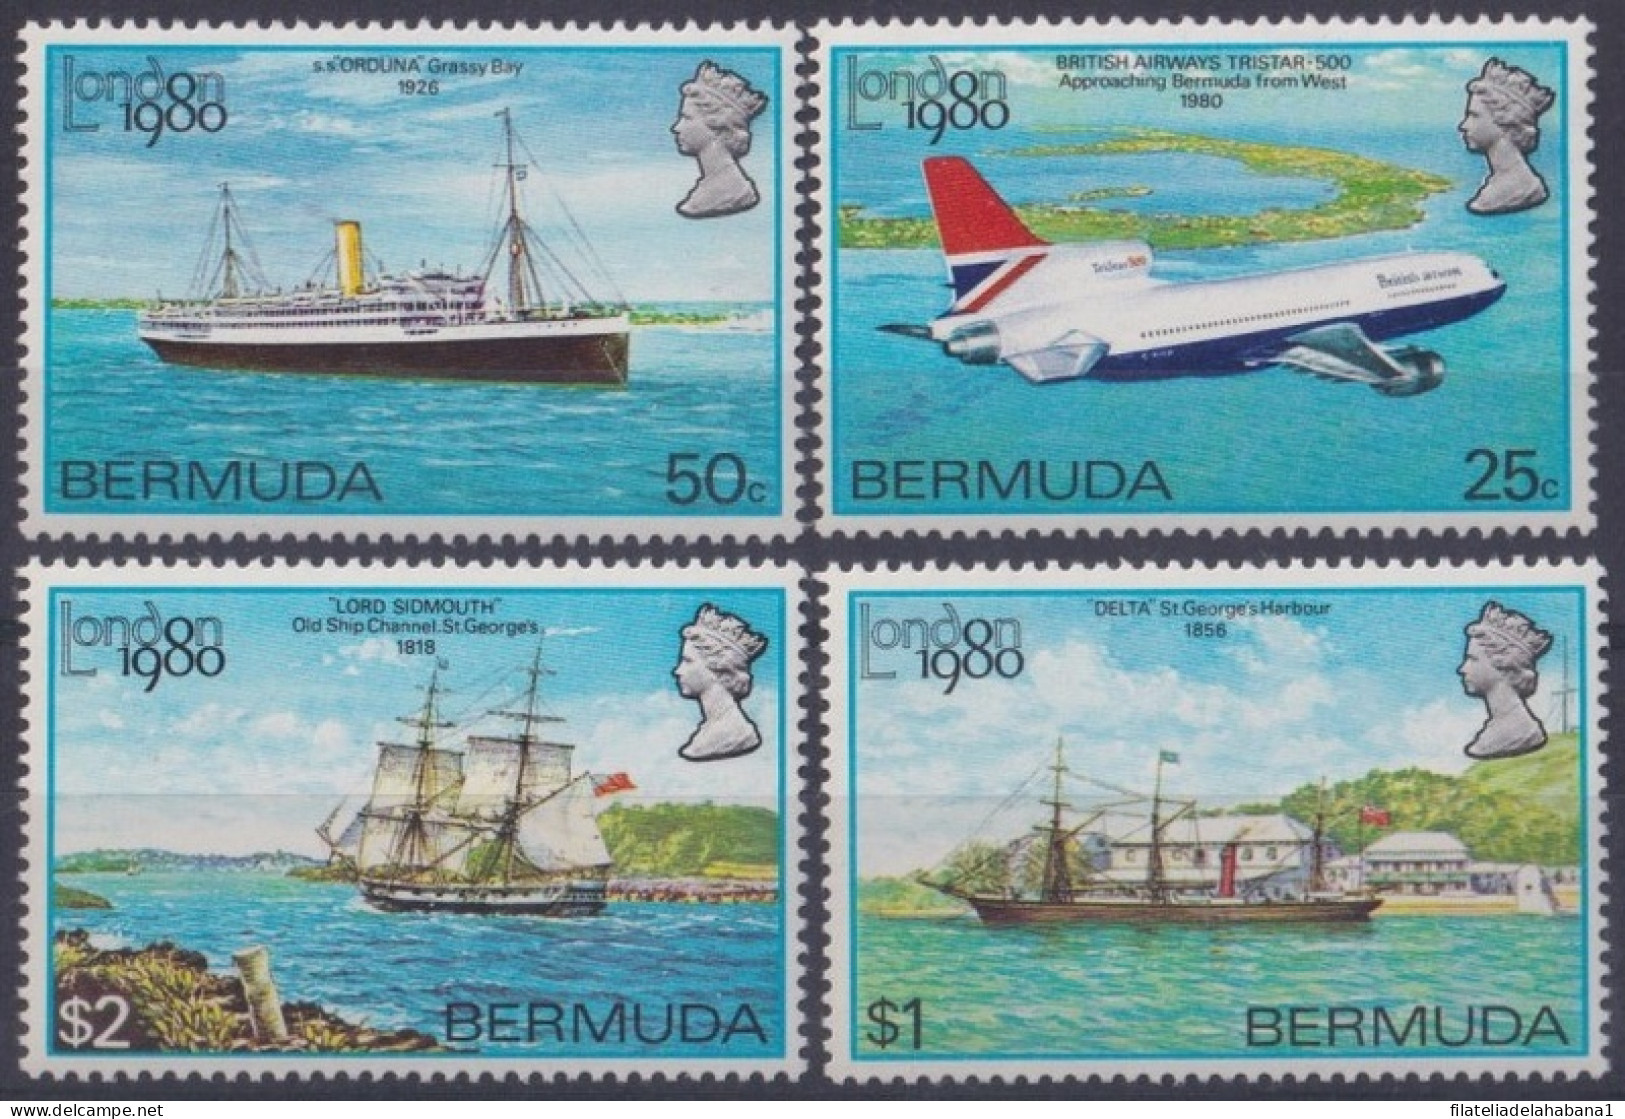 F-EX49865 BERMUDA IS MNH 1980 LONDON EXPO AIRPLANE SHIP BARCOS BOAT.  - Barche